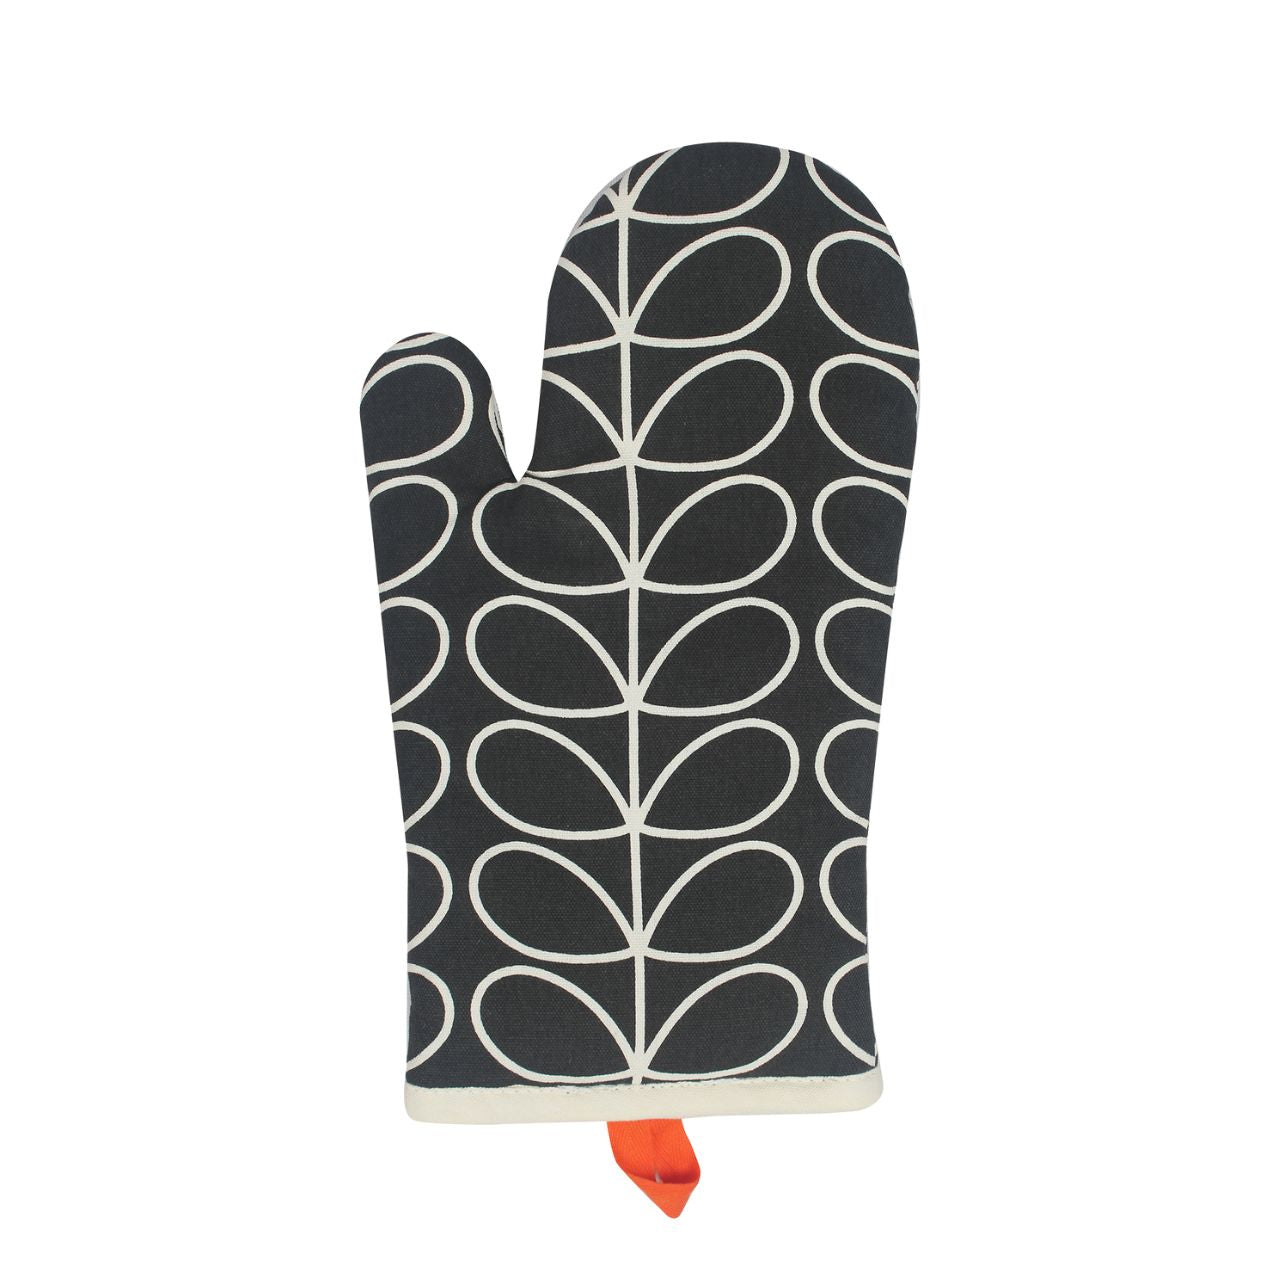 Tipperary Orla Kiely Oven Mitt - Linear Stem Slate  An Orla Kiely oven gauntlet with a beautiful Stem design in cool slate.  Keep your hand safe from burns and scalds in the kitchen with the beautiful stem print oven glove from Orla Kiely. With a handy little loop on the glove, it can easily be stored on a hook to stop it from getting lost.